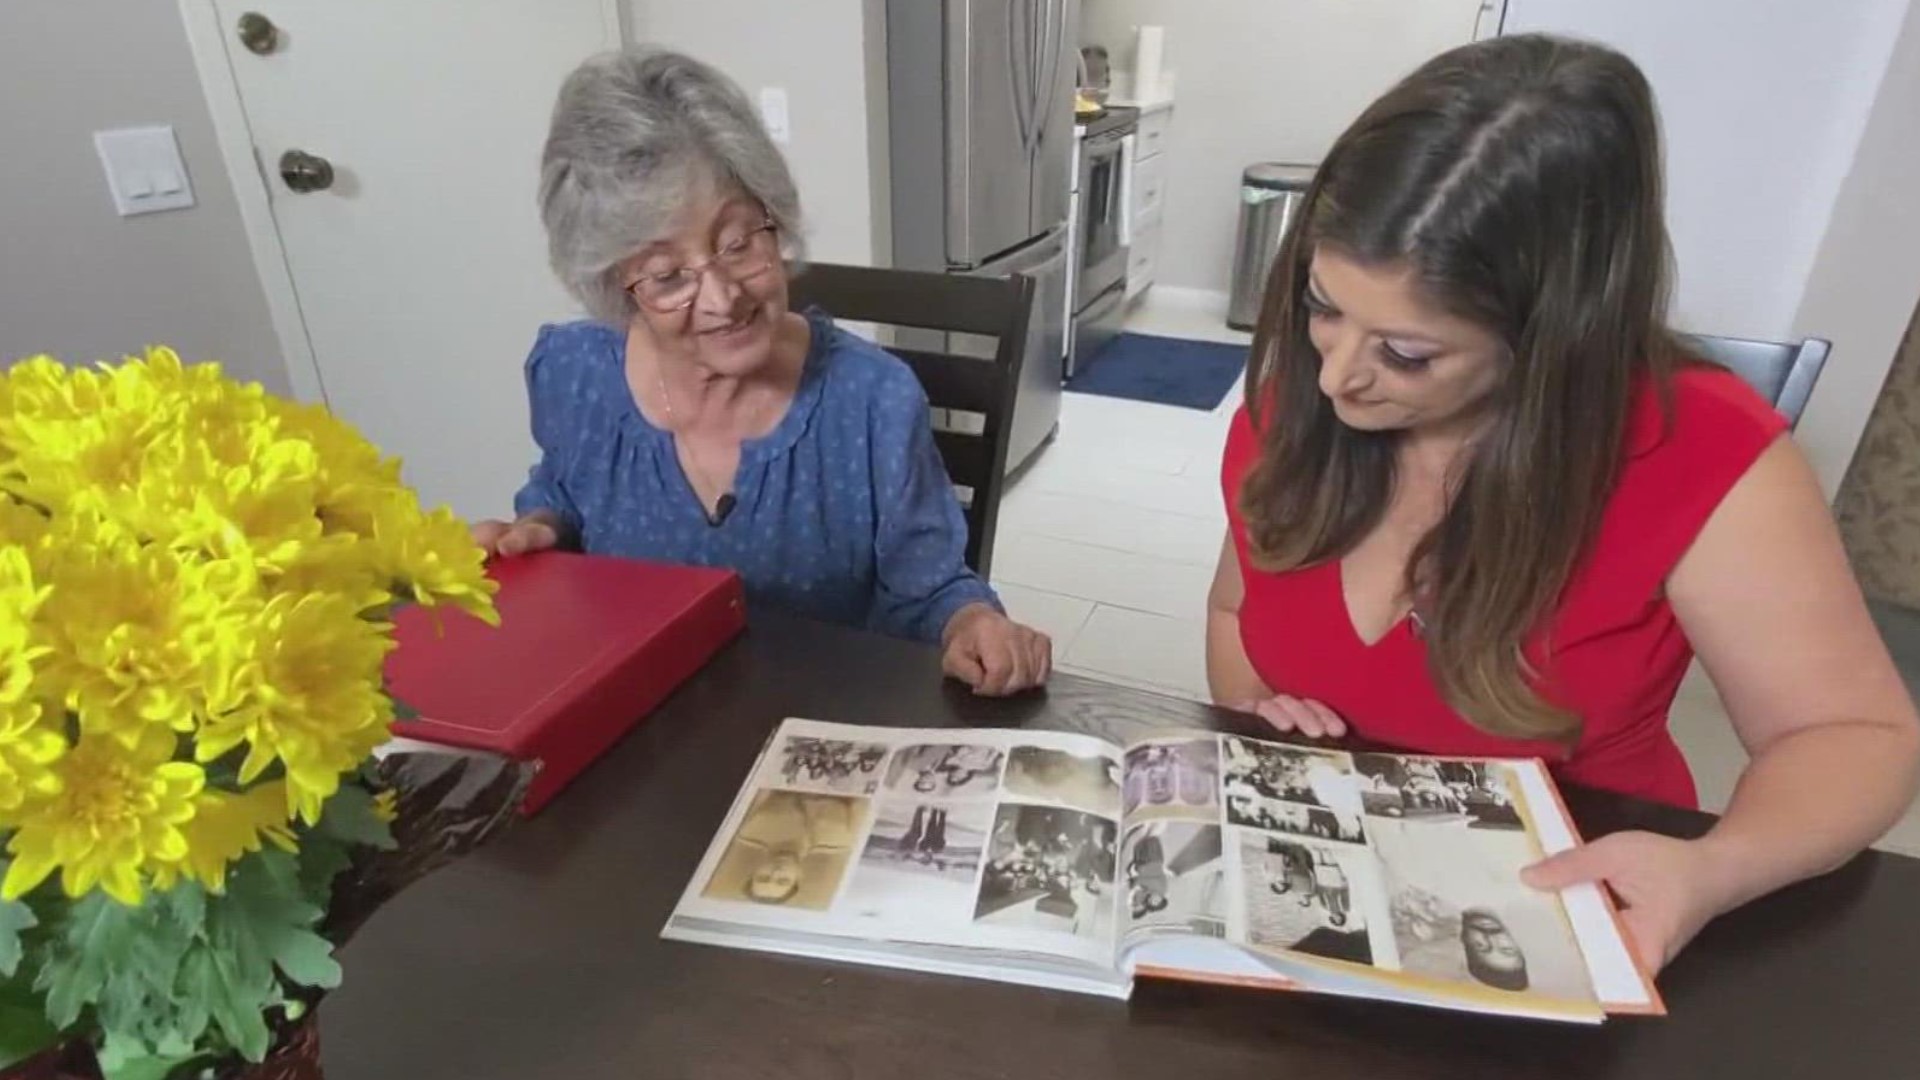 CBS 8’s Neda Iranpour has a one-on-one interview with her mom about her memories of a free Iran.